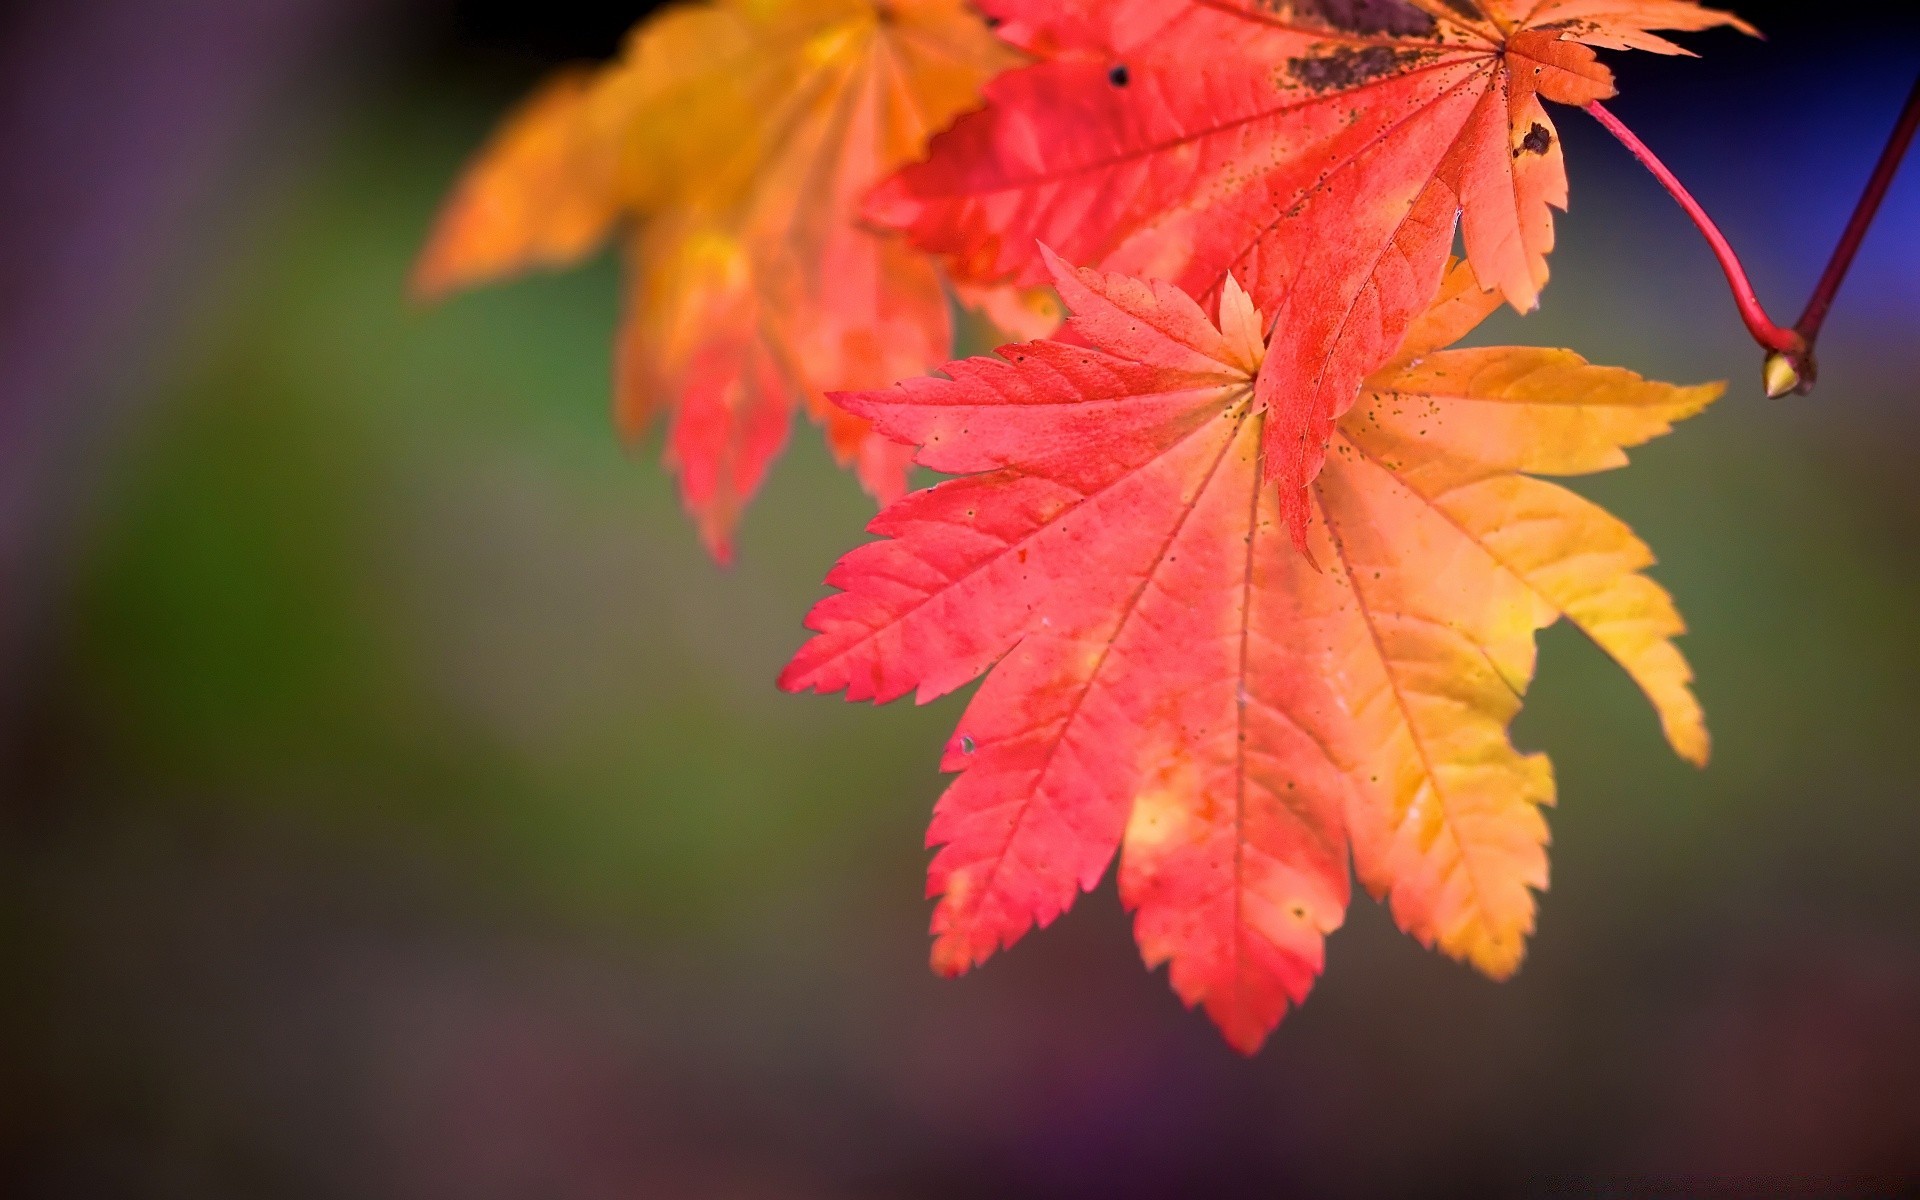 Autumn Leaf Nature Fall Bright Outdoors Flora Maple - Cover For Facebook Autumn - HD Wallpaper 